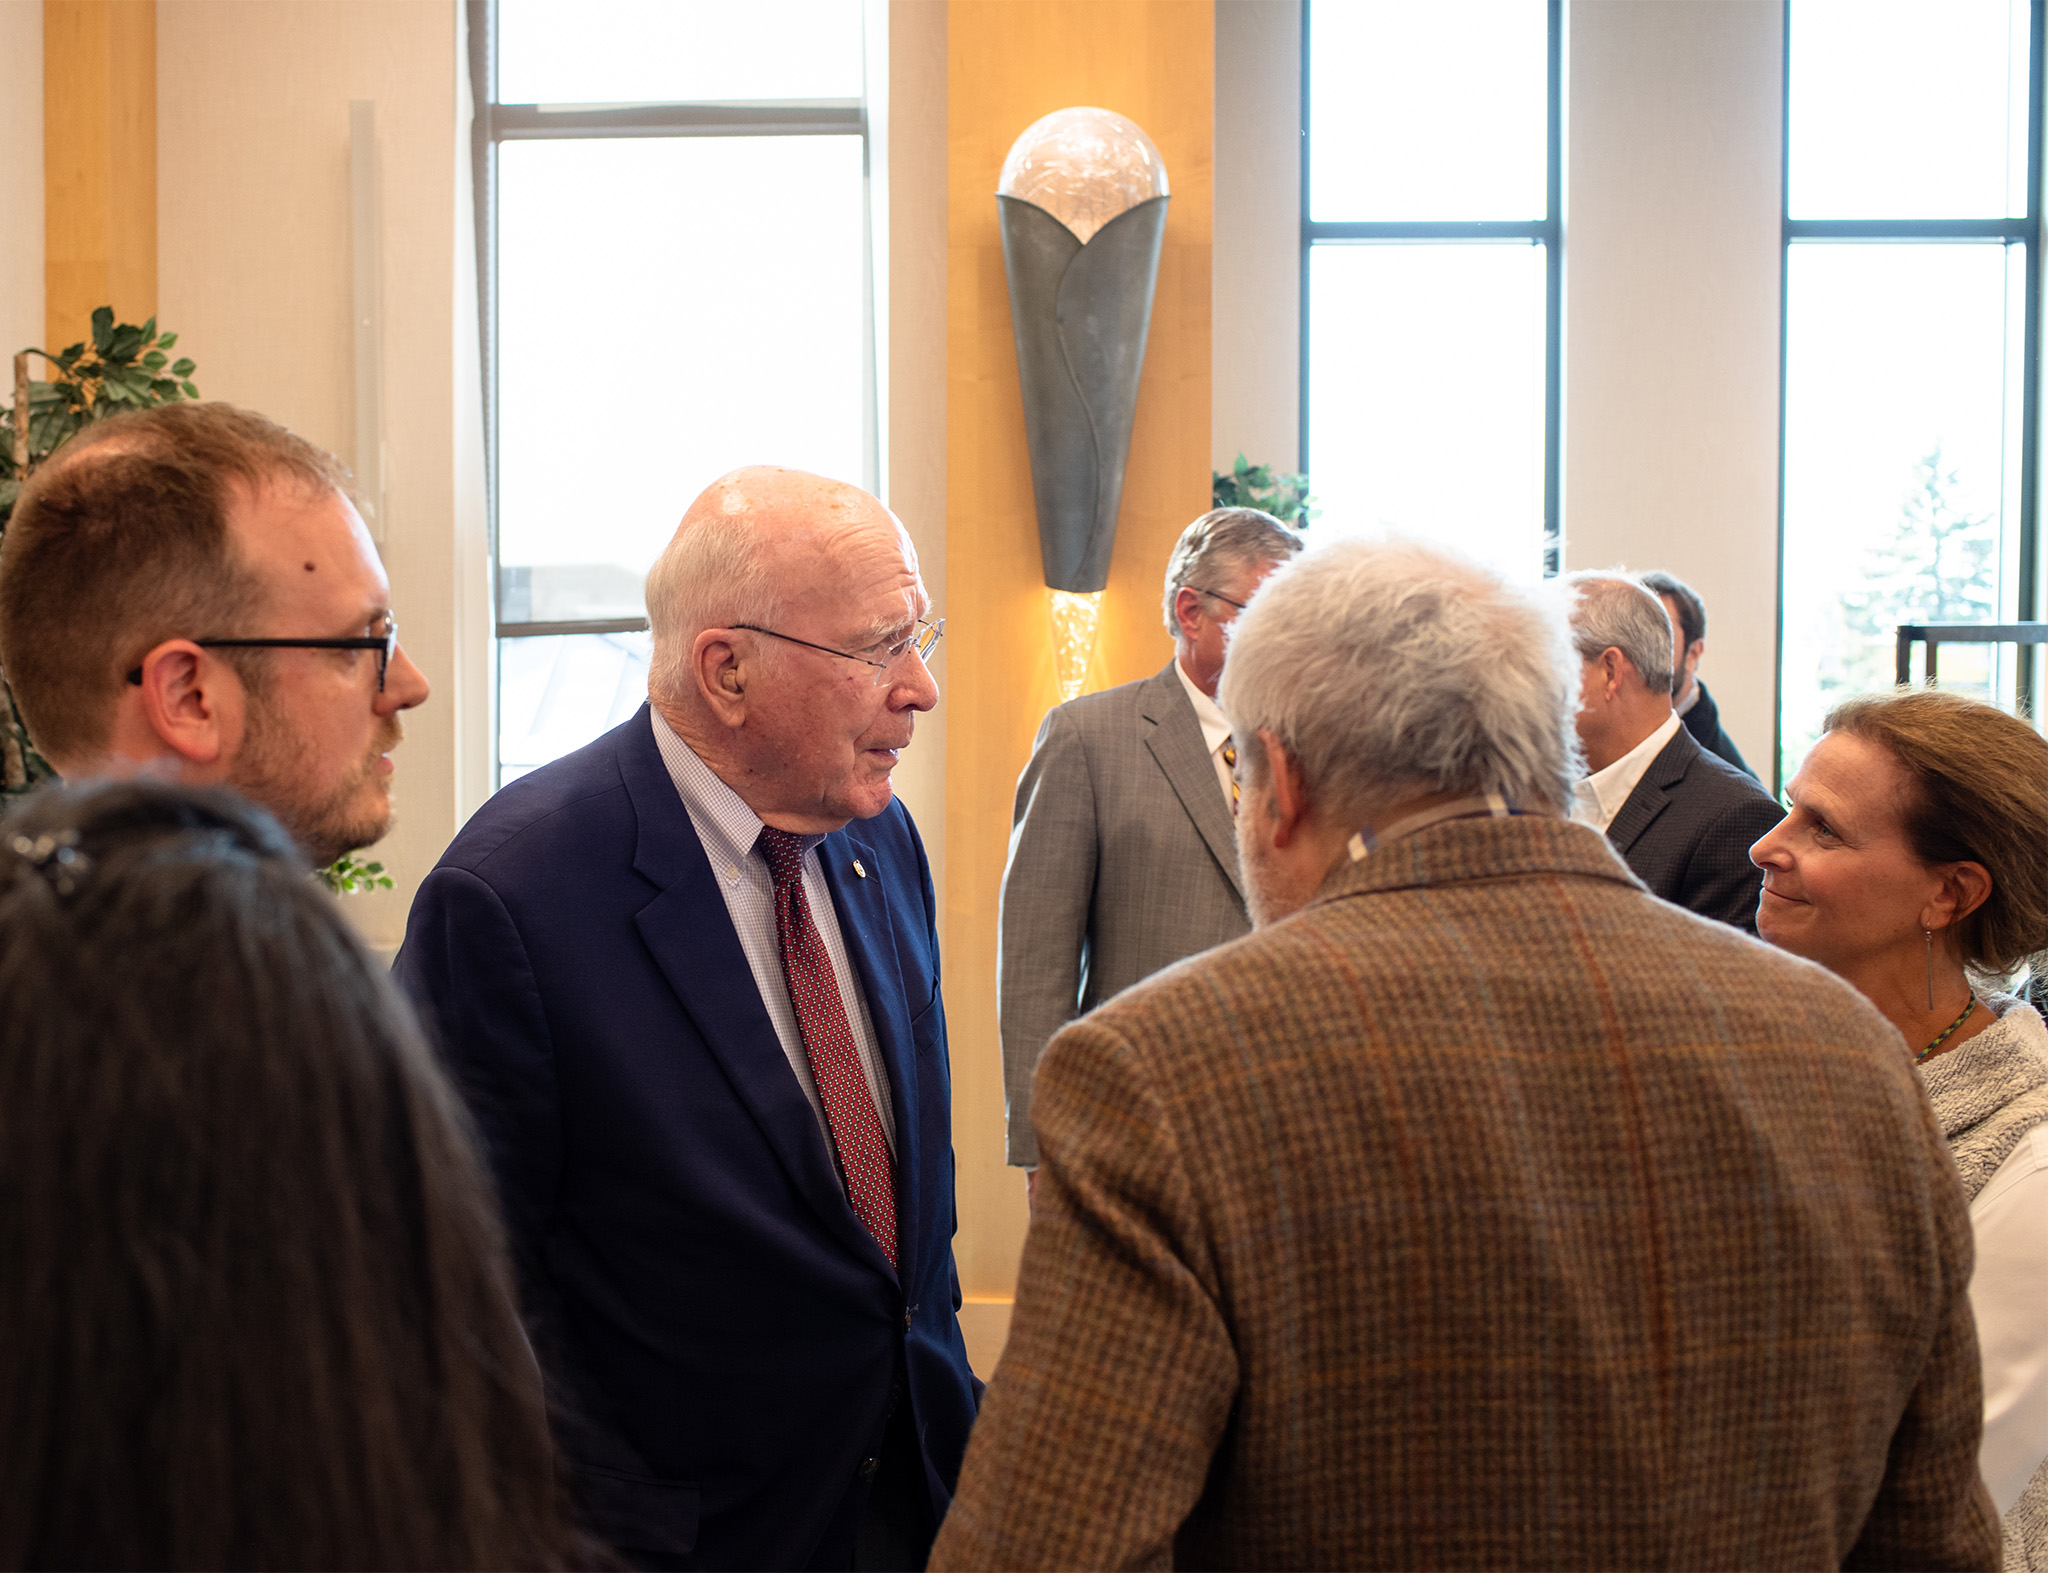 Senator Patrick Leahy speaks with Champlain College administrators and guests after a speech.